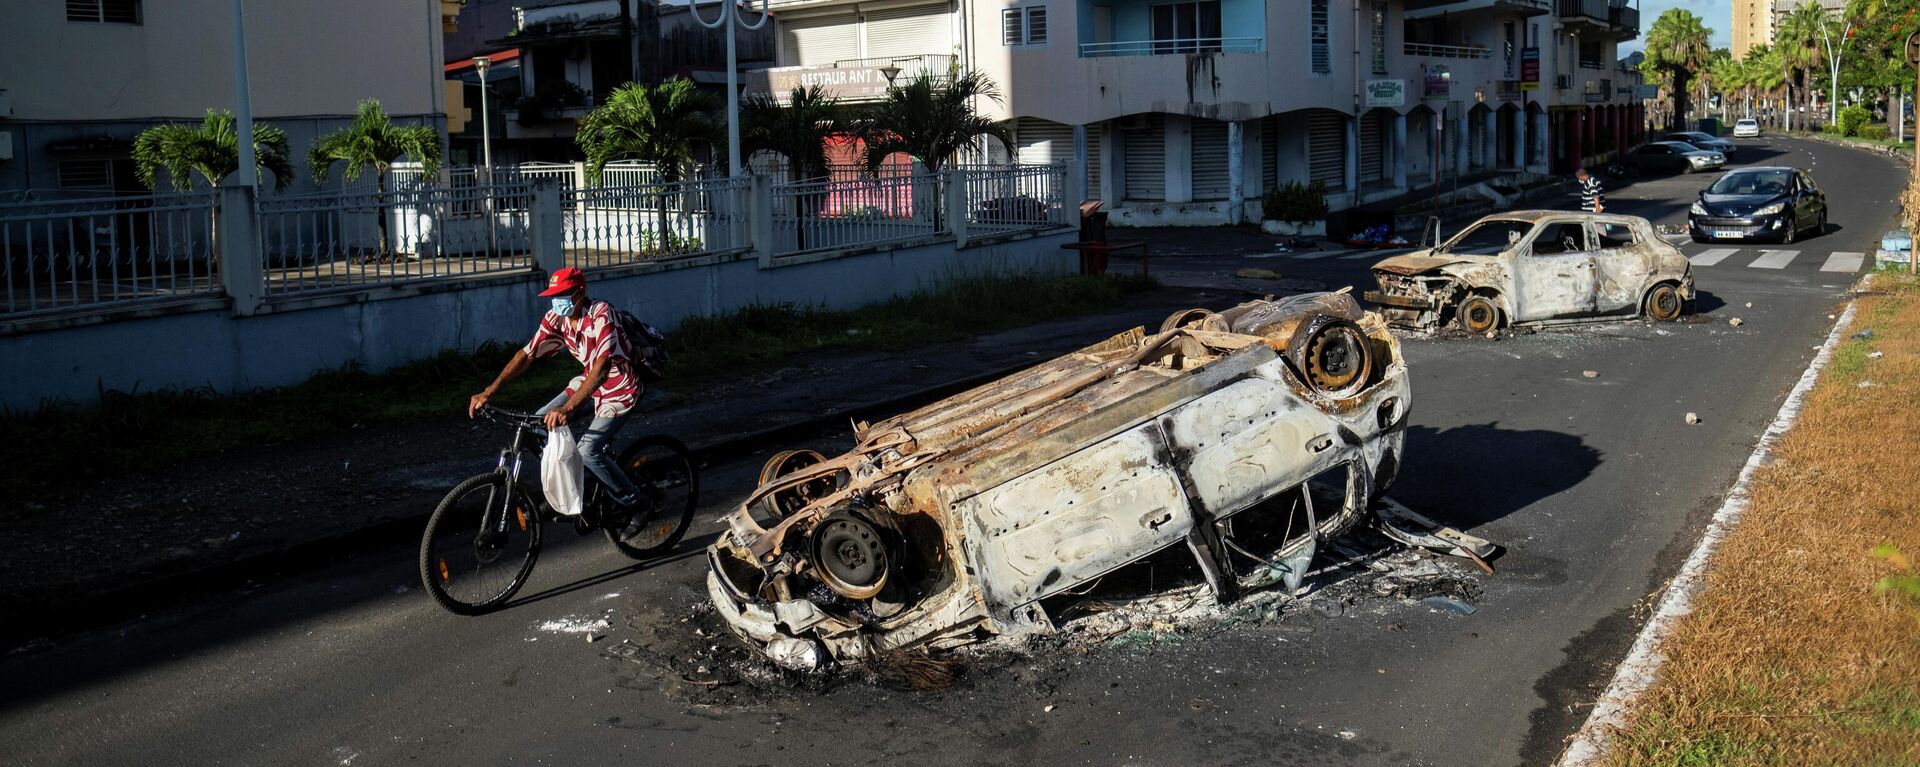 A man rides his bicycle past burned cars after violent demonstrations which broke out over coronavirus disease (COVID-19) protocols, in Pointe-a-Pitre, Guadeloupe November 21, 2021 - Sputnik International, 1920, 23.11.2021